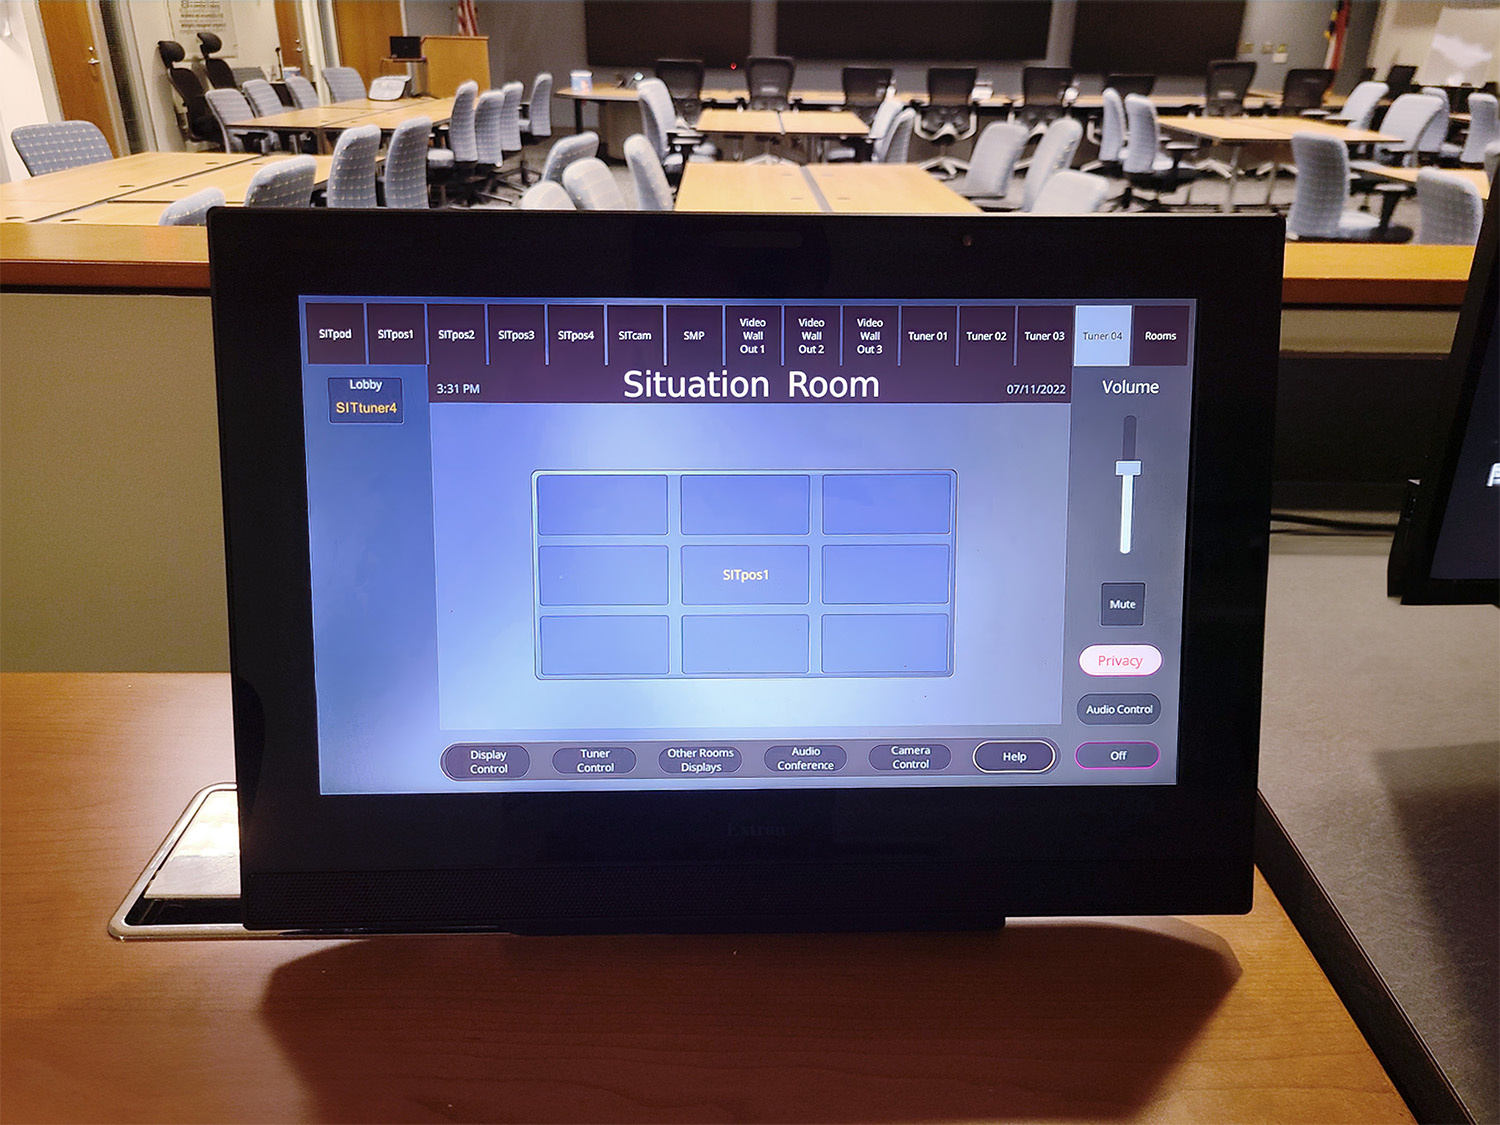 Thumbnail - AV signals from sources such as computers running specialized software, broadcast news feeds, and devices connected at the tables are sent to one or more of the displays, with all operations controlled by an Extron 15" tabletop TouchLink Pro touchpanel at the head table.